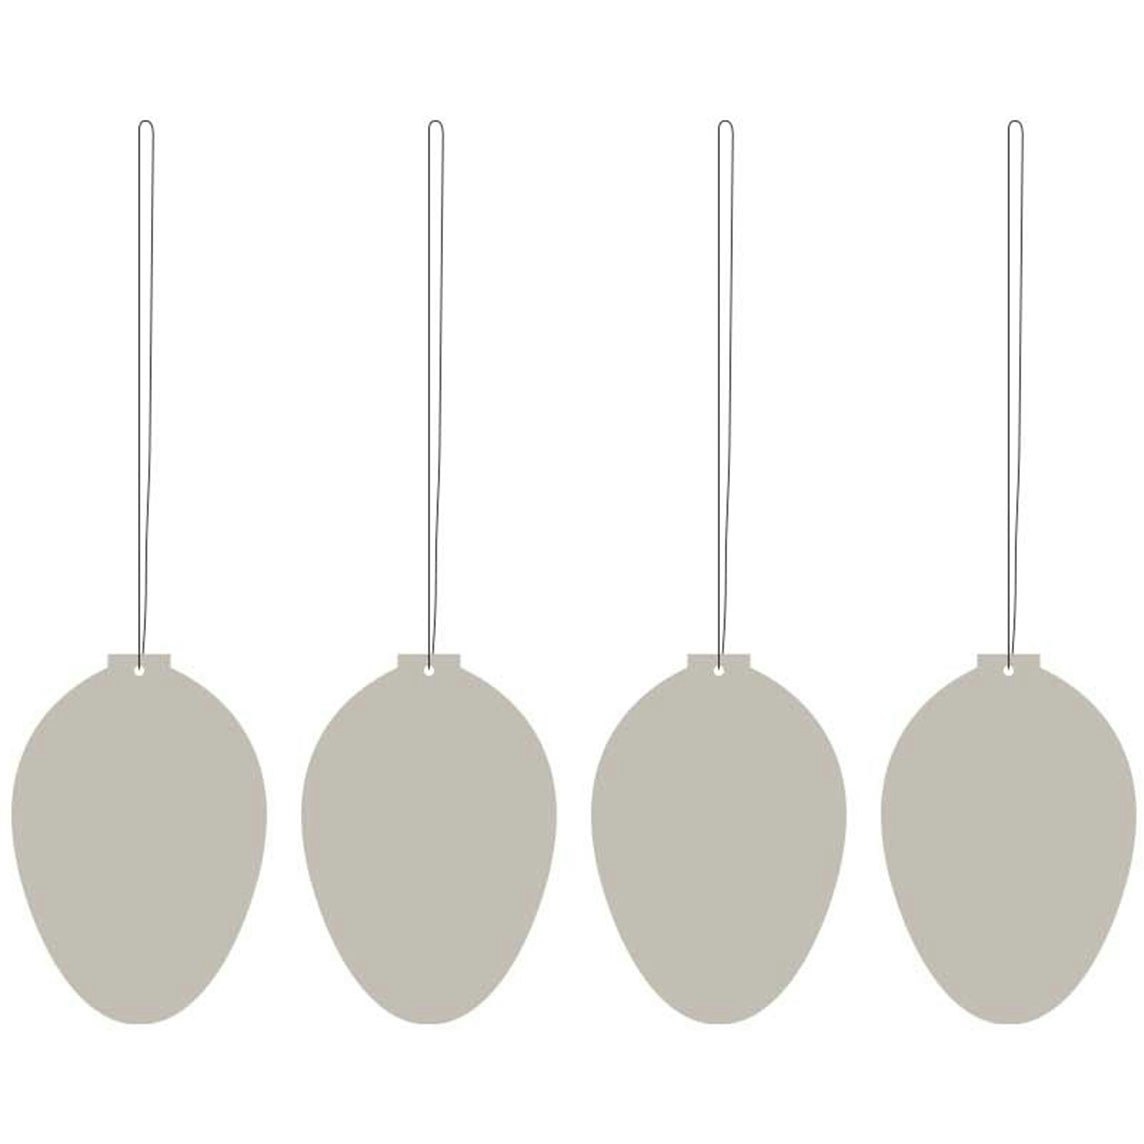 Egg Easter Decoration Stainless Steel 4-pack, Sand